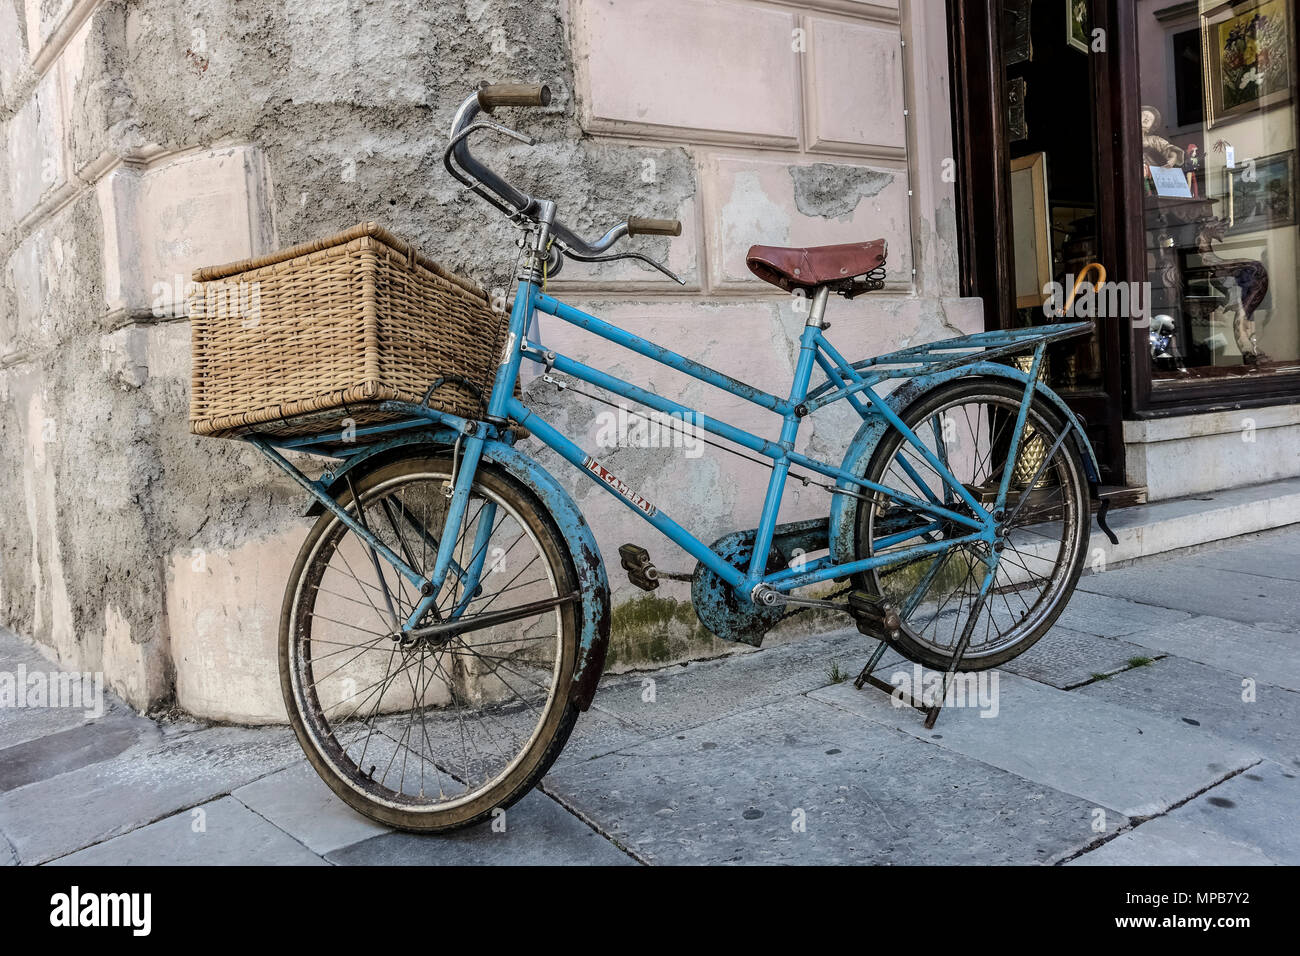 Light blue old bike with delivery basket, parked in front of a shop. Gorizia, Italy, Europe, European Union, EU. Stock Photo